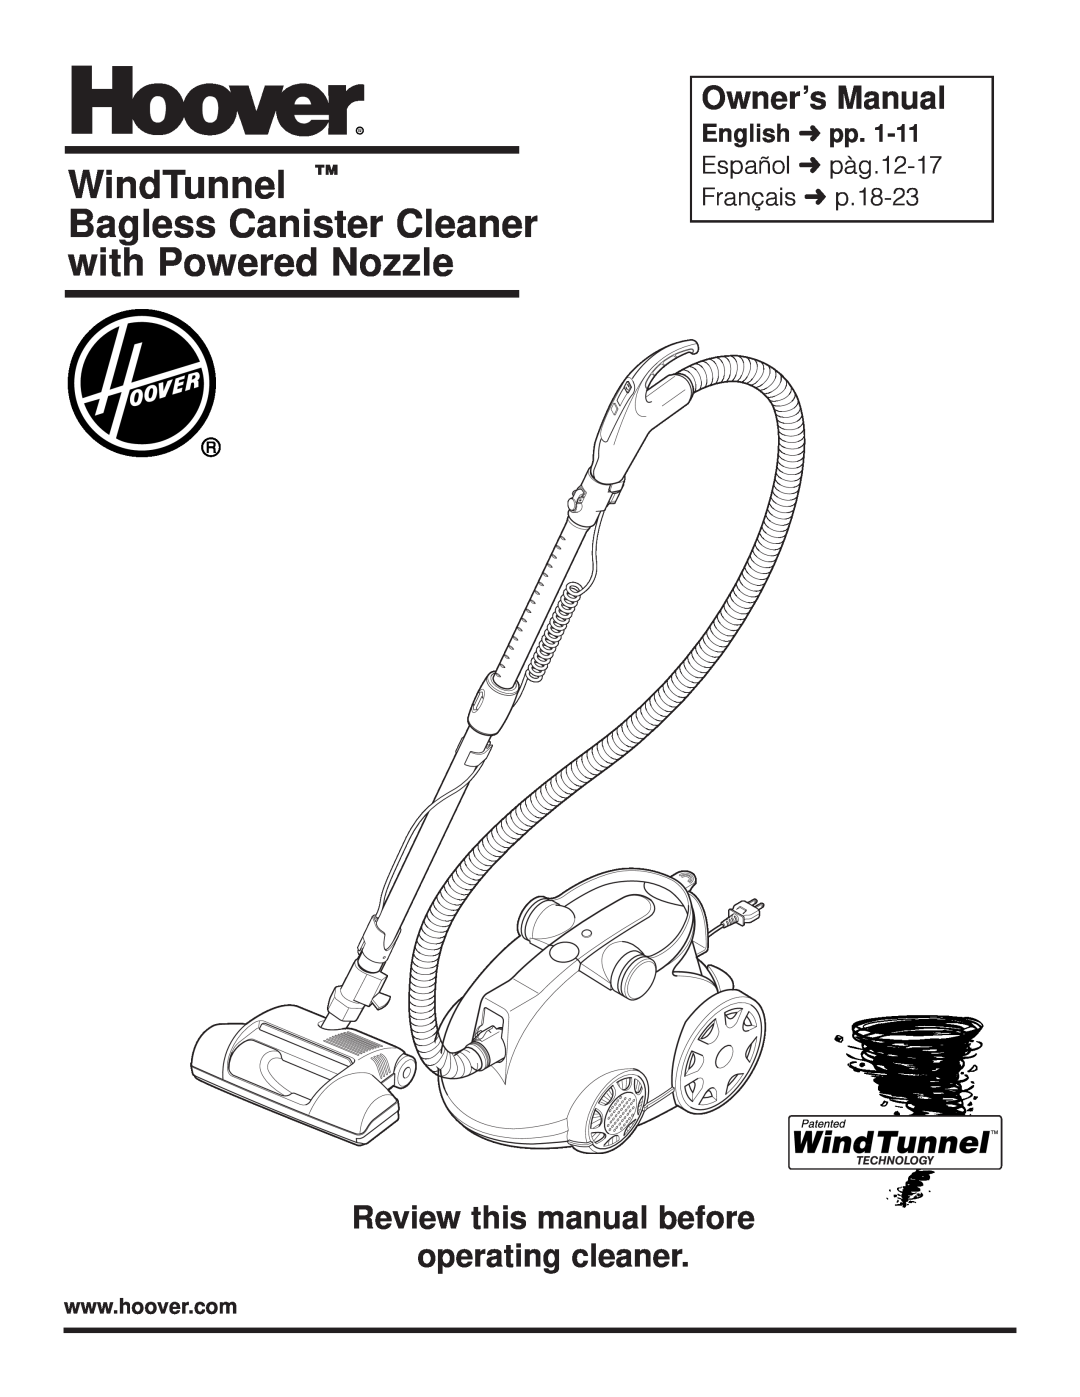 Hoover S3755050 owner manual Owner’s Manual, Review this manual before operating cleaner 